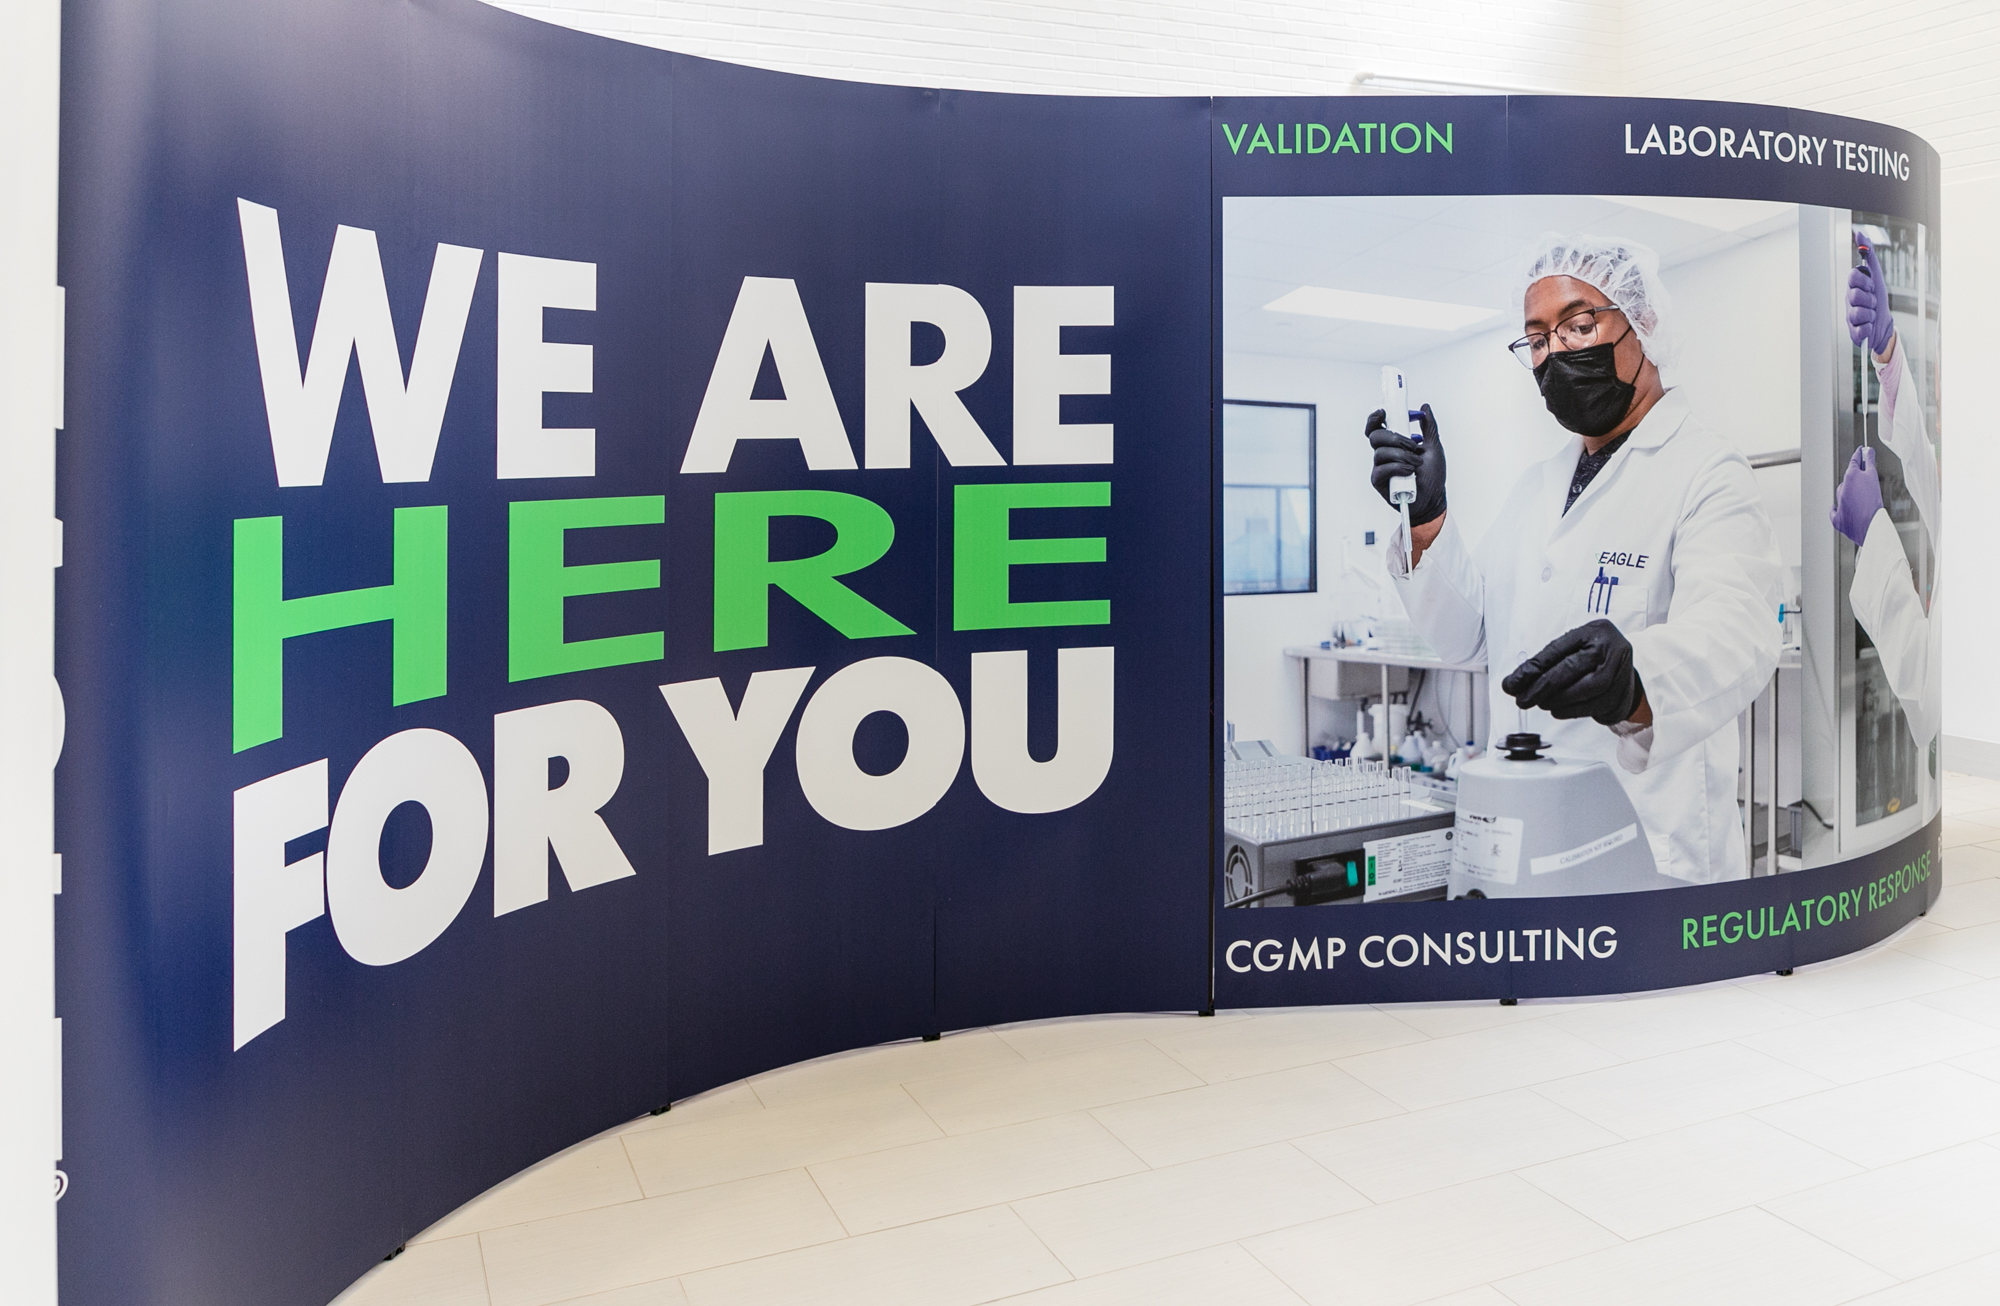 Image of Eagle's backdrop for booth for PDA. Booth shows images of two scientists performing sampling testing. The text states, "WE ARE HERE TO HELP YOU." Validation, Laboratory Testing, Training, CGMP Consulting, Regulatory Response, Remediation." On the booth's endcaps are EAGLE Science-based solutions logos.